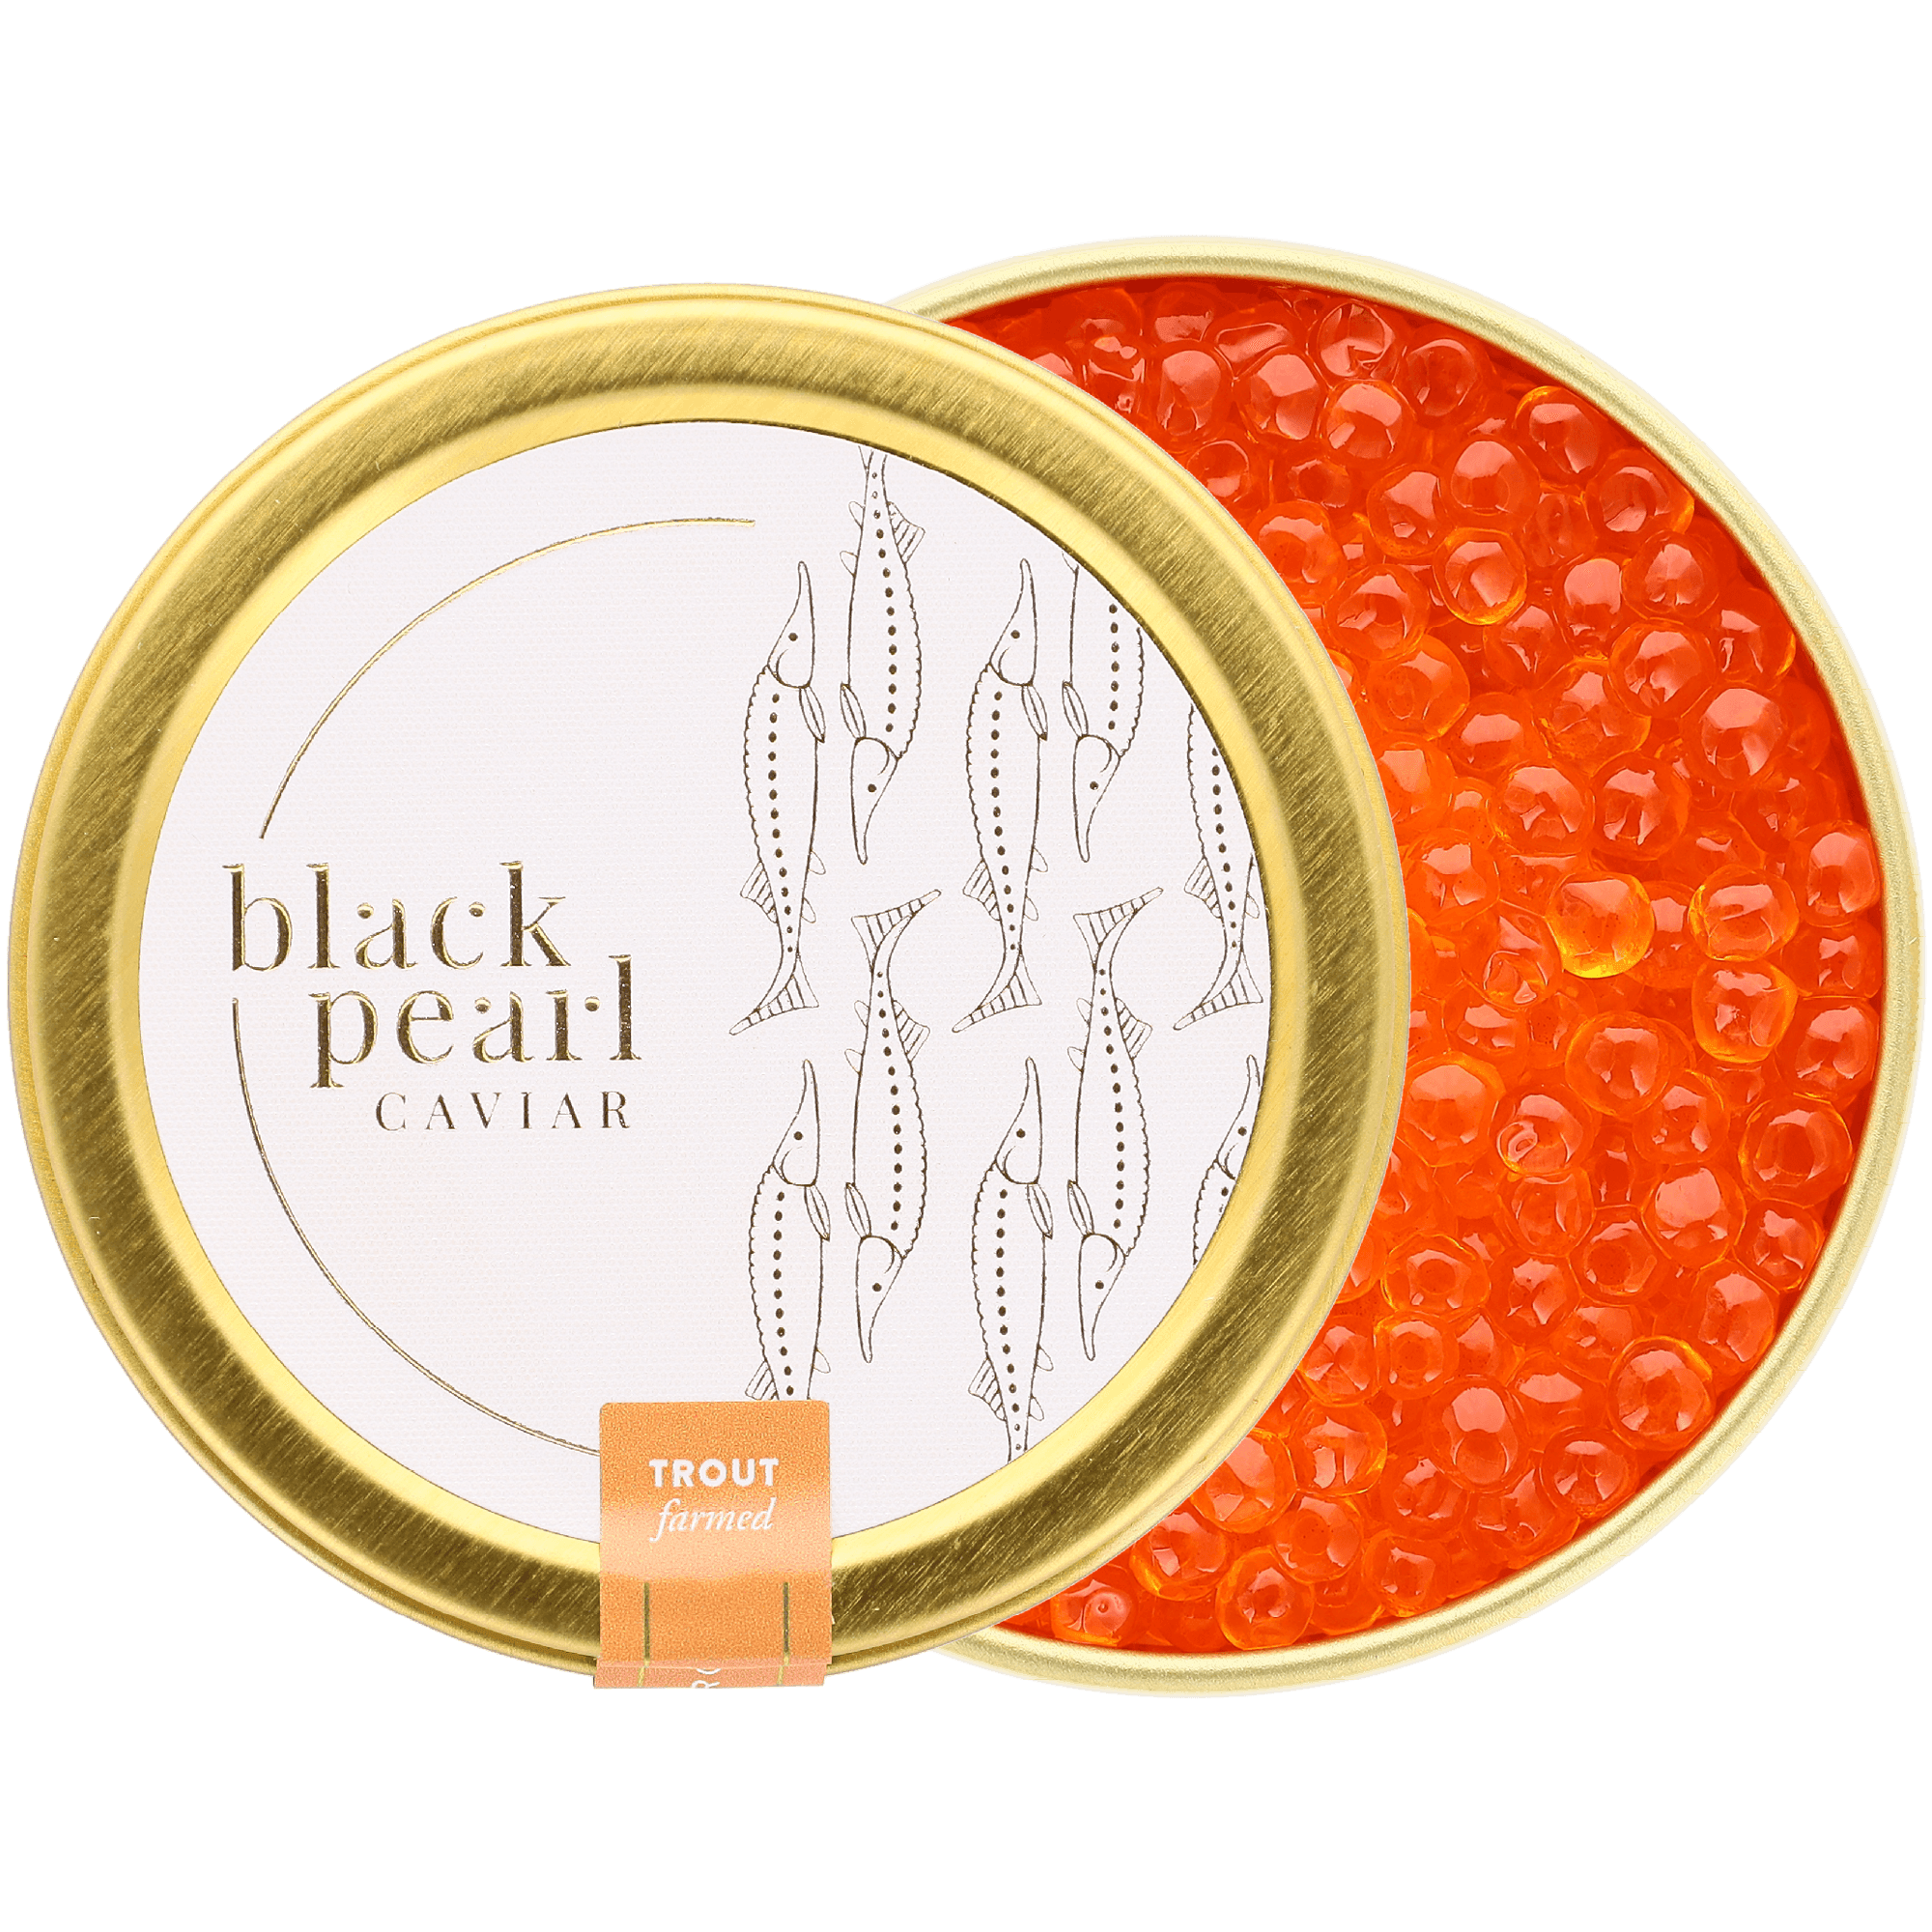 Trout Roe - Savory Gourmet